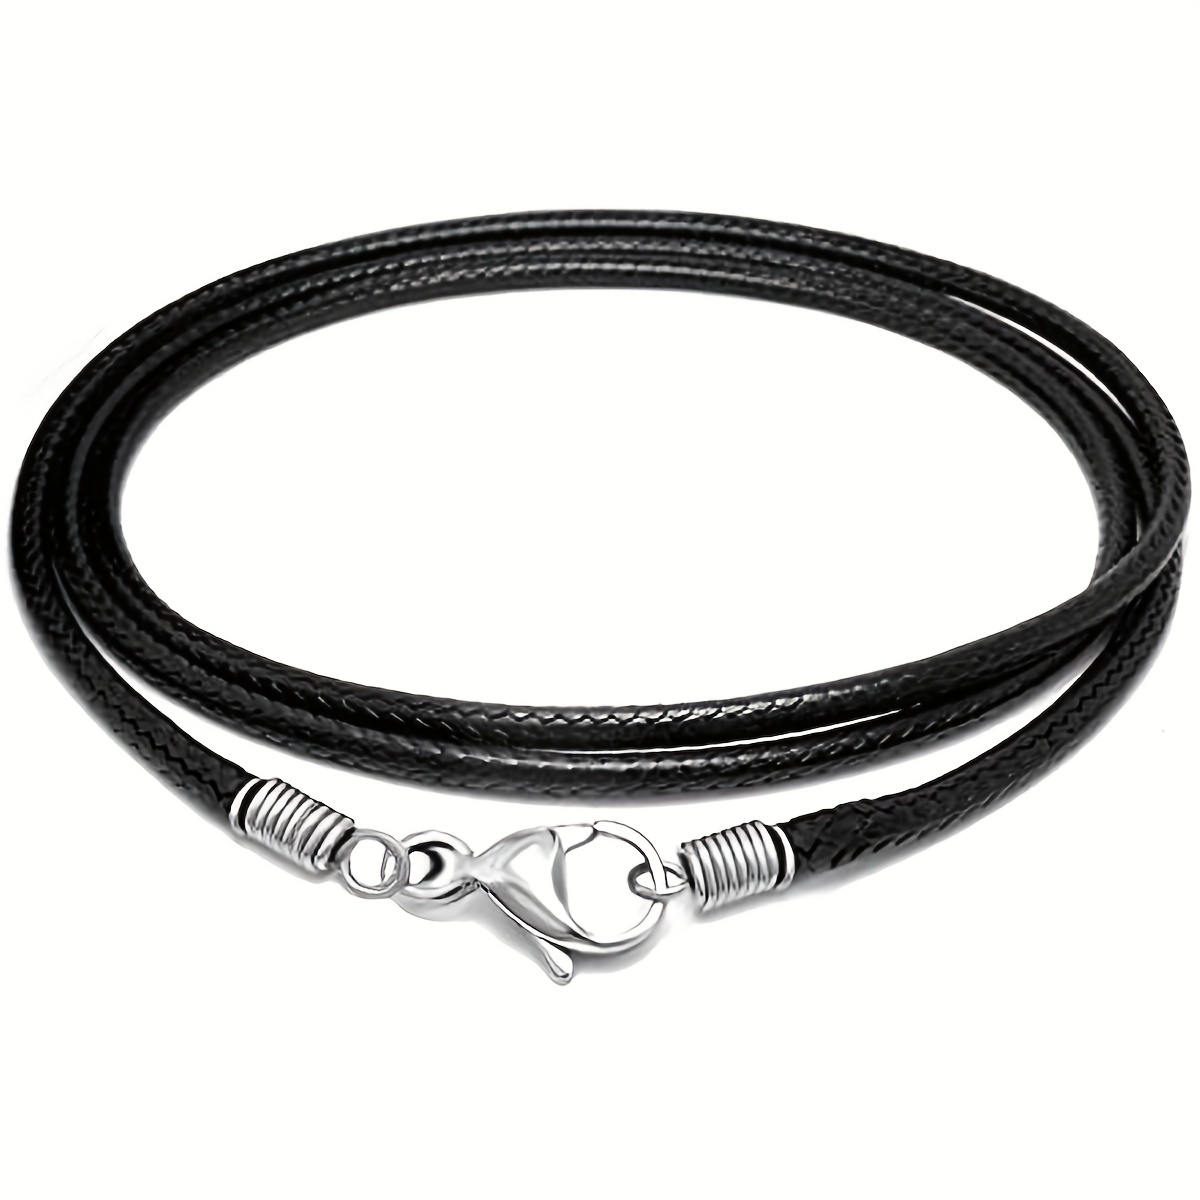 2meter/lot 3/4/5/6mm Round Classic Vintage Braided Genuine Cow Leather For  DIY Necklace Bracelet gift Making